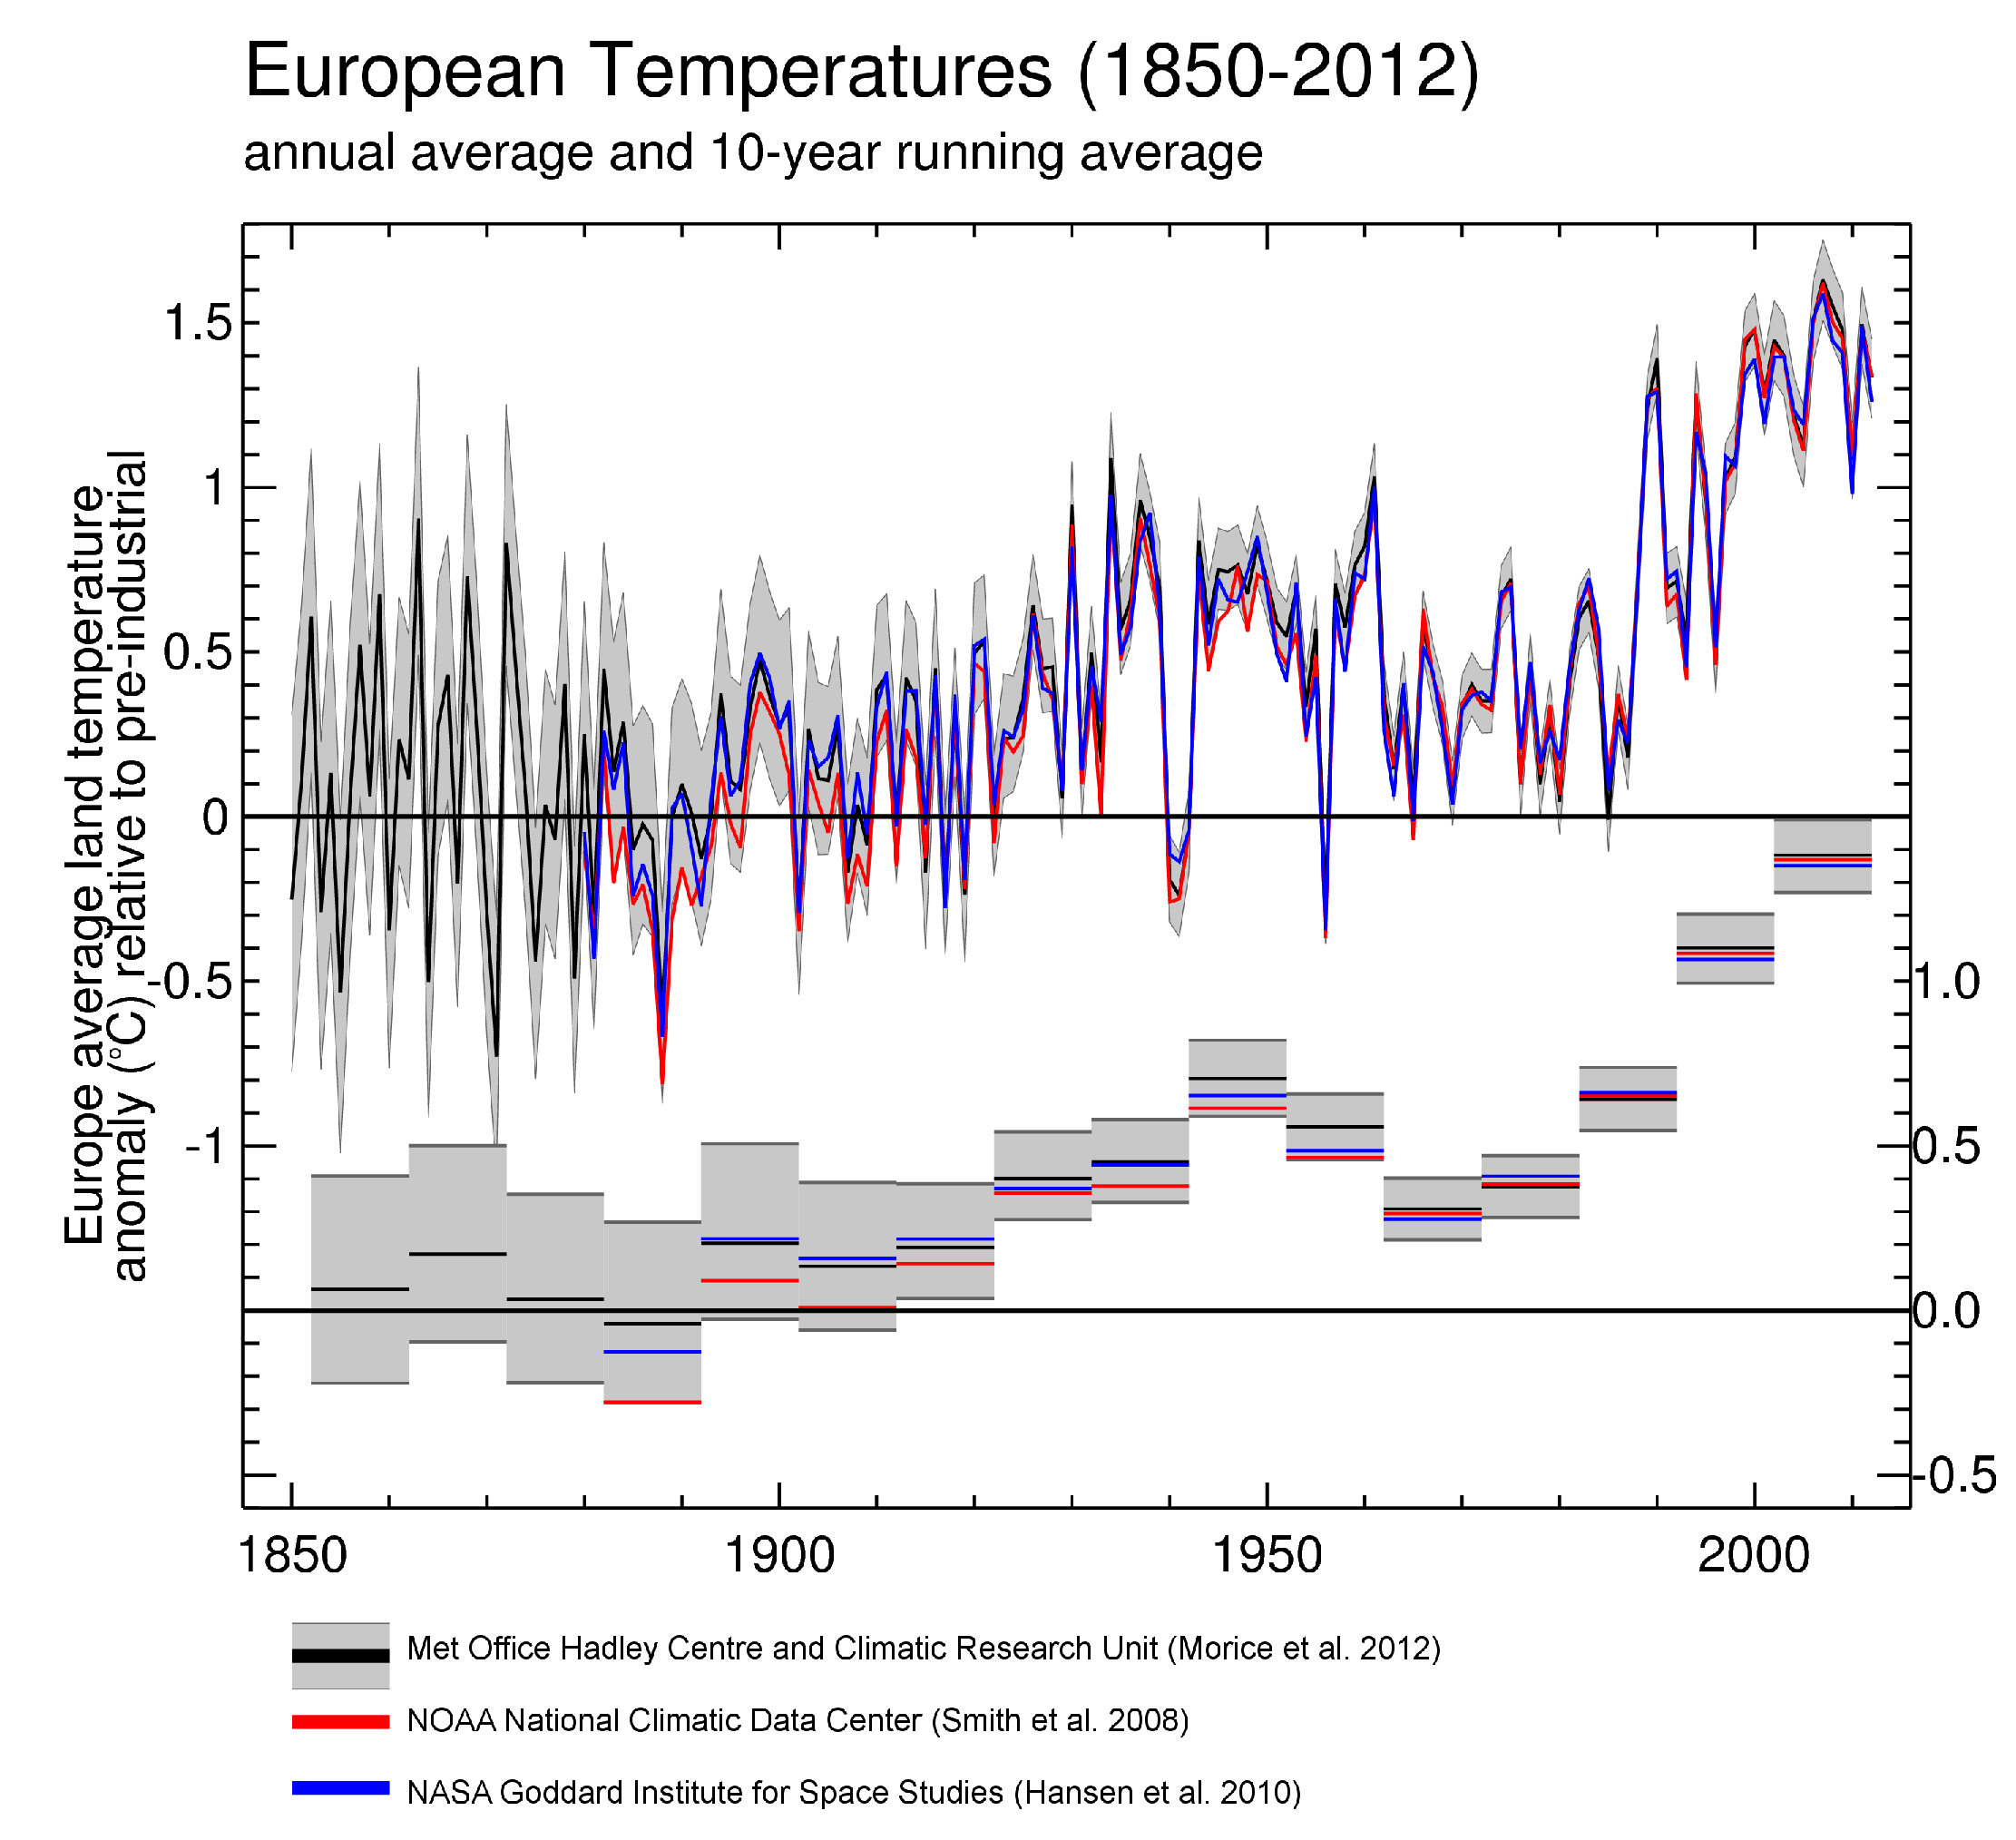 European average air temperature anomalies (1850 to 2012) in °C over land areas only 